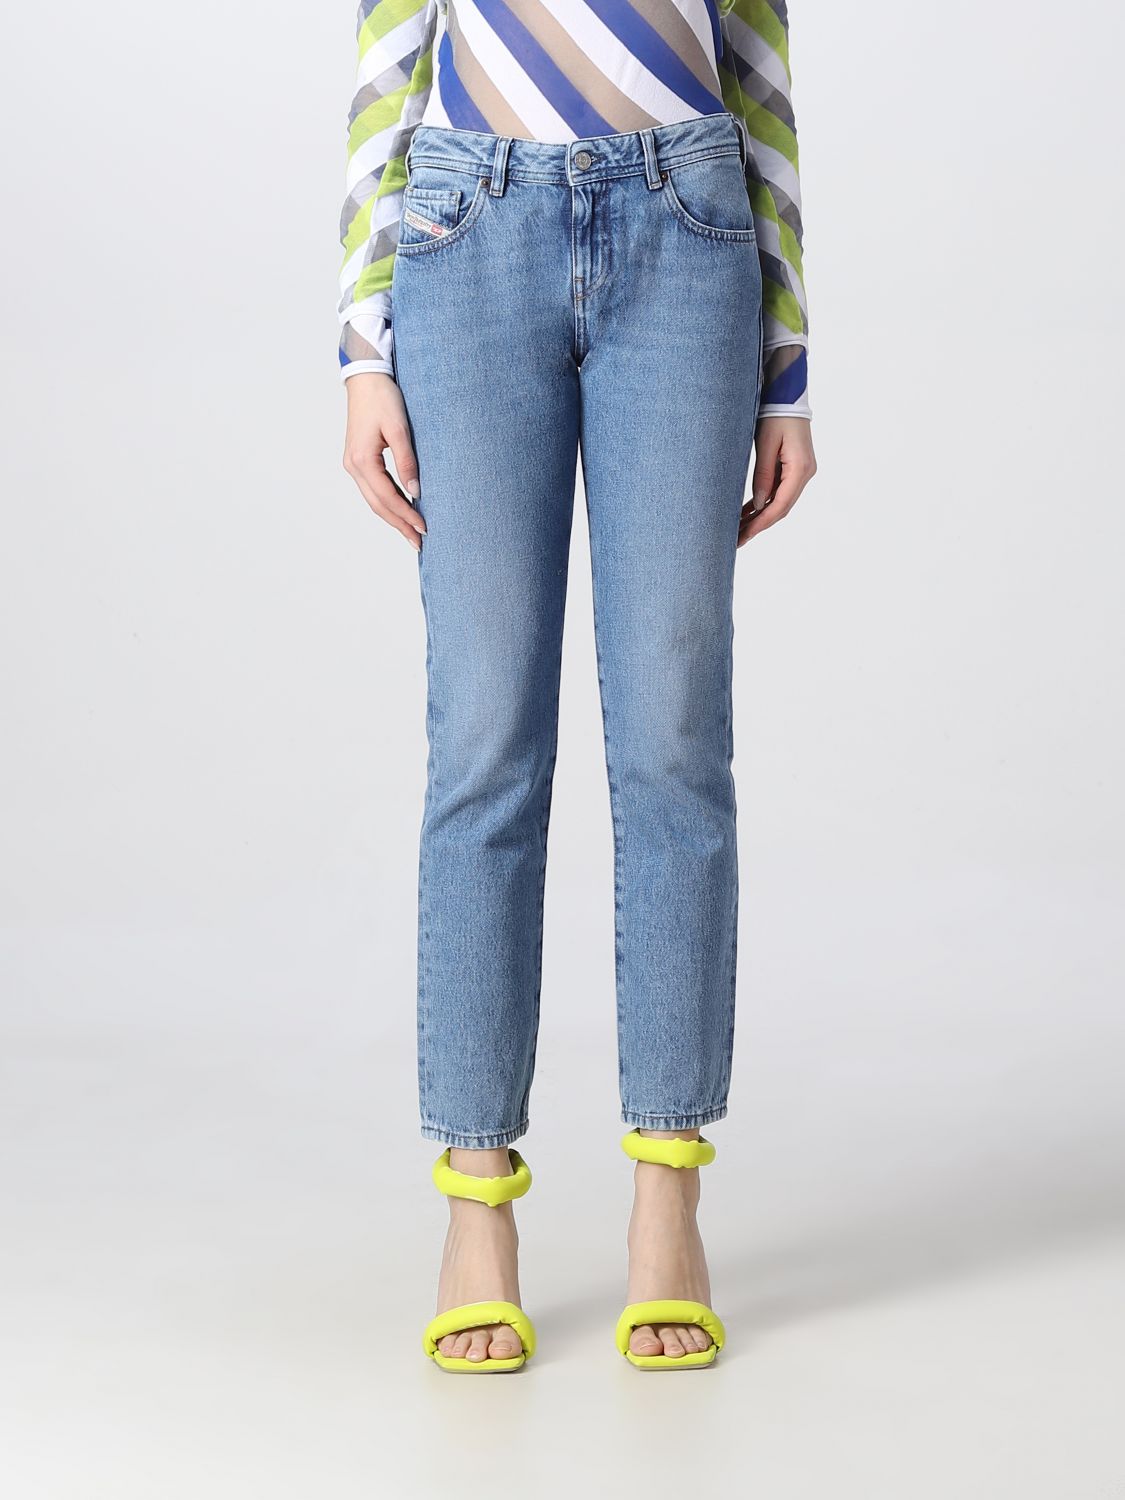 Diesel jeans for woman - Stone Washed | Diesel jeans A0361009C16 online on GIGLIO.COM